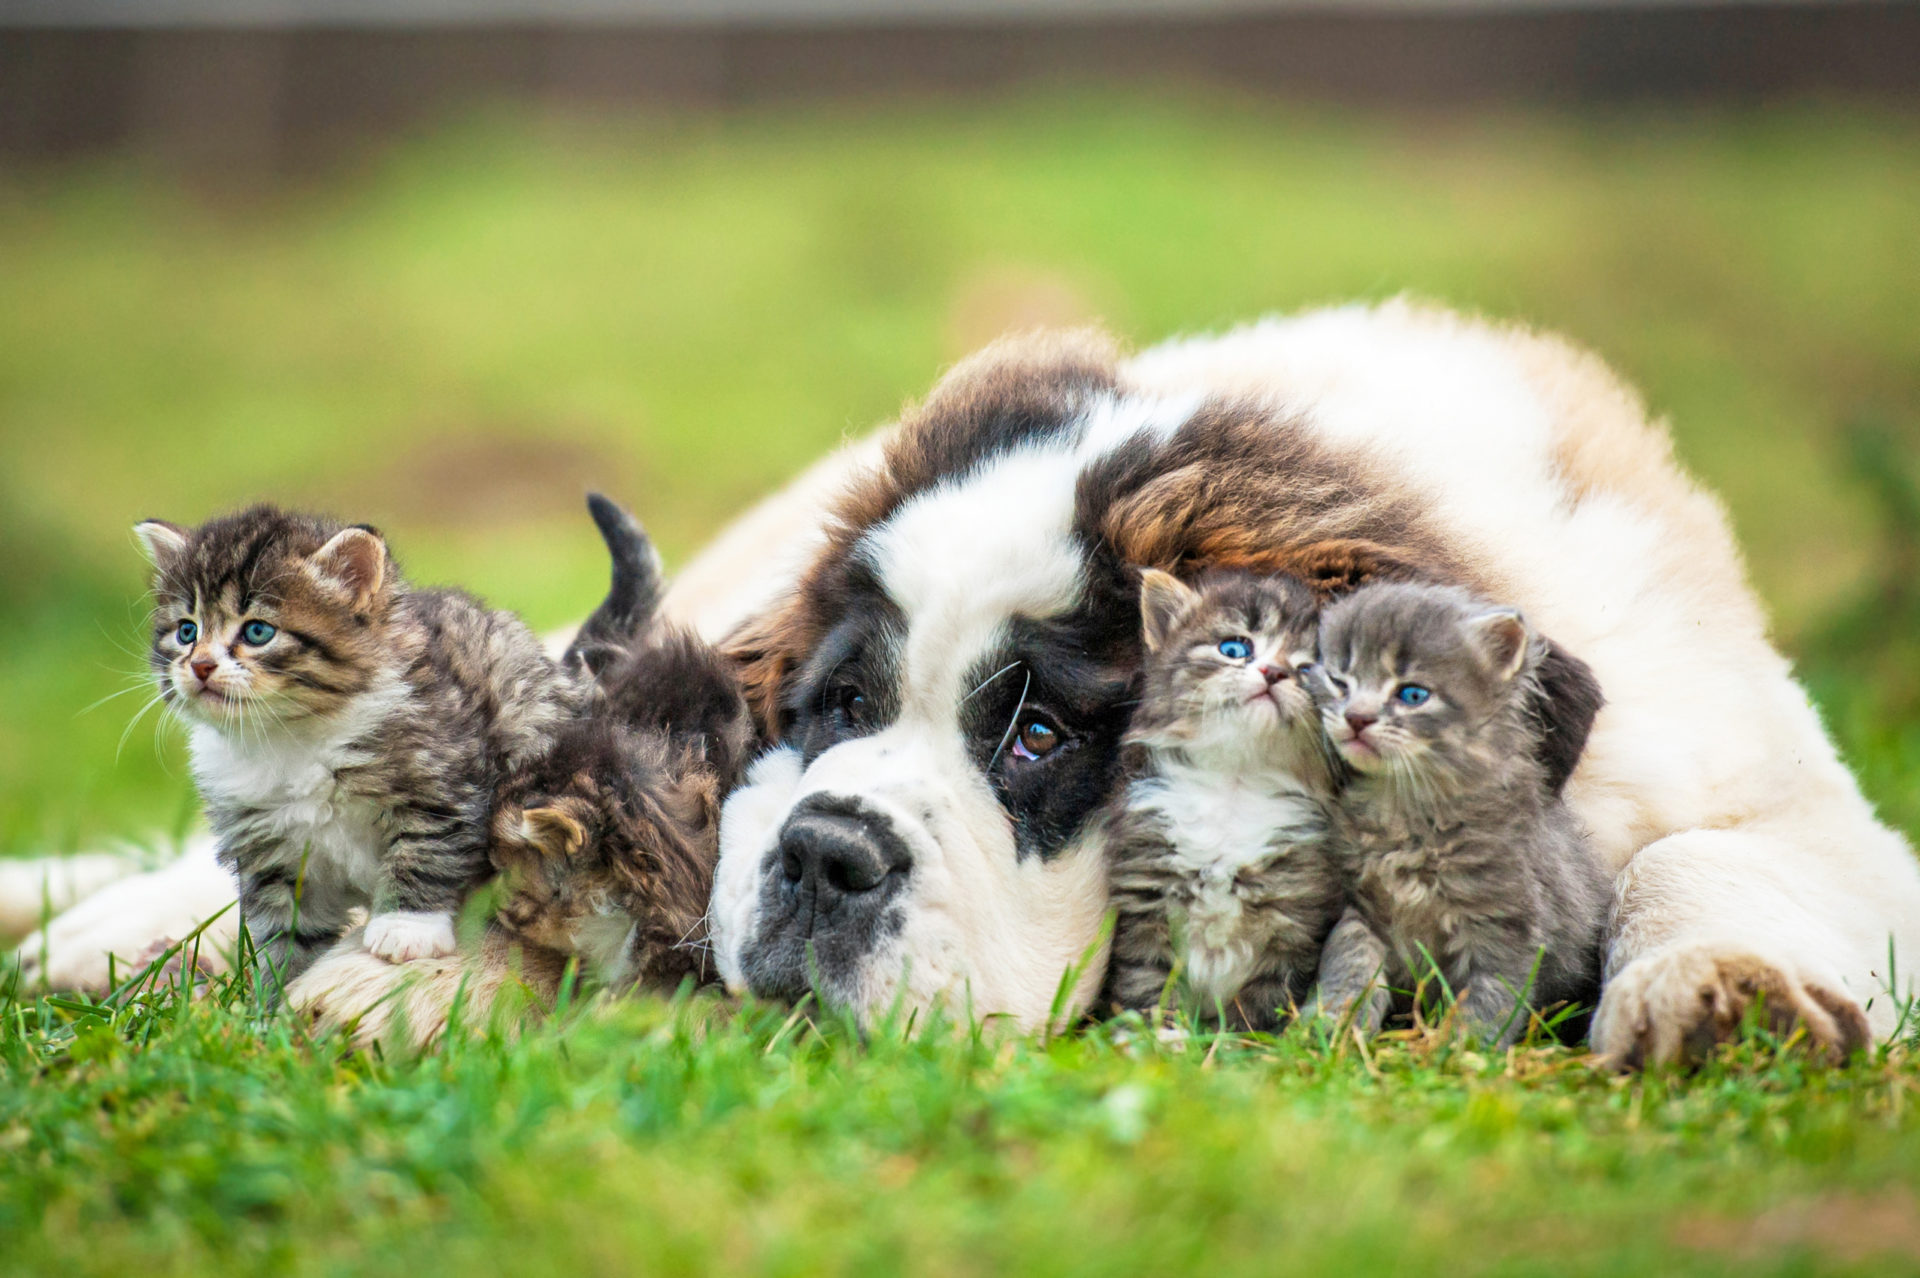 My Cats & Dogs HD Wallpaper New Tab Theme